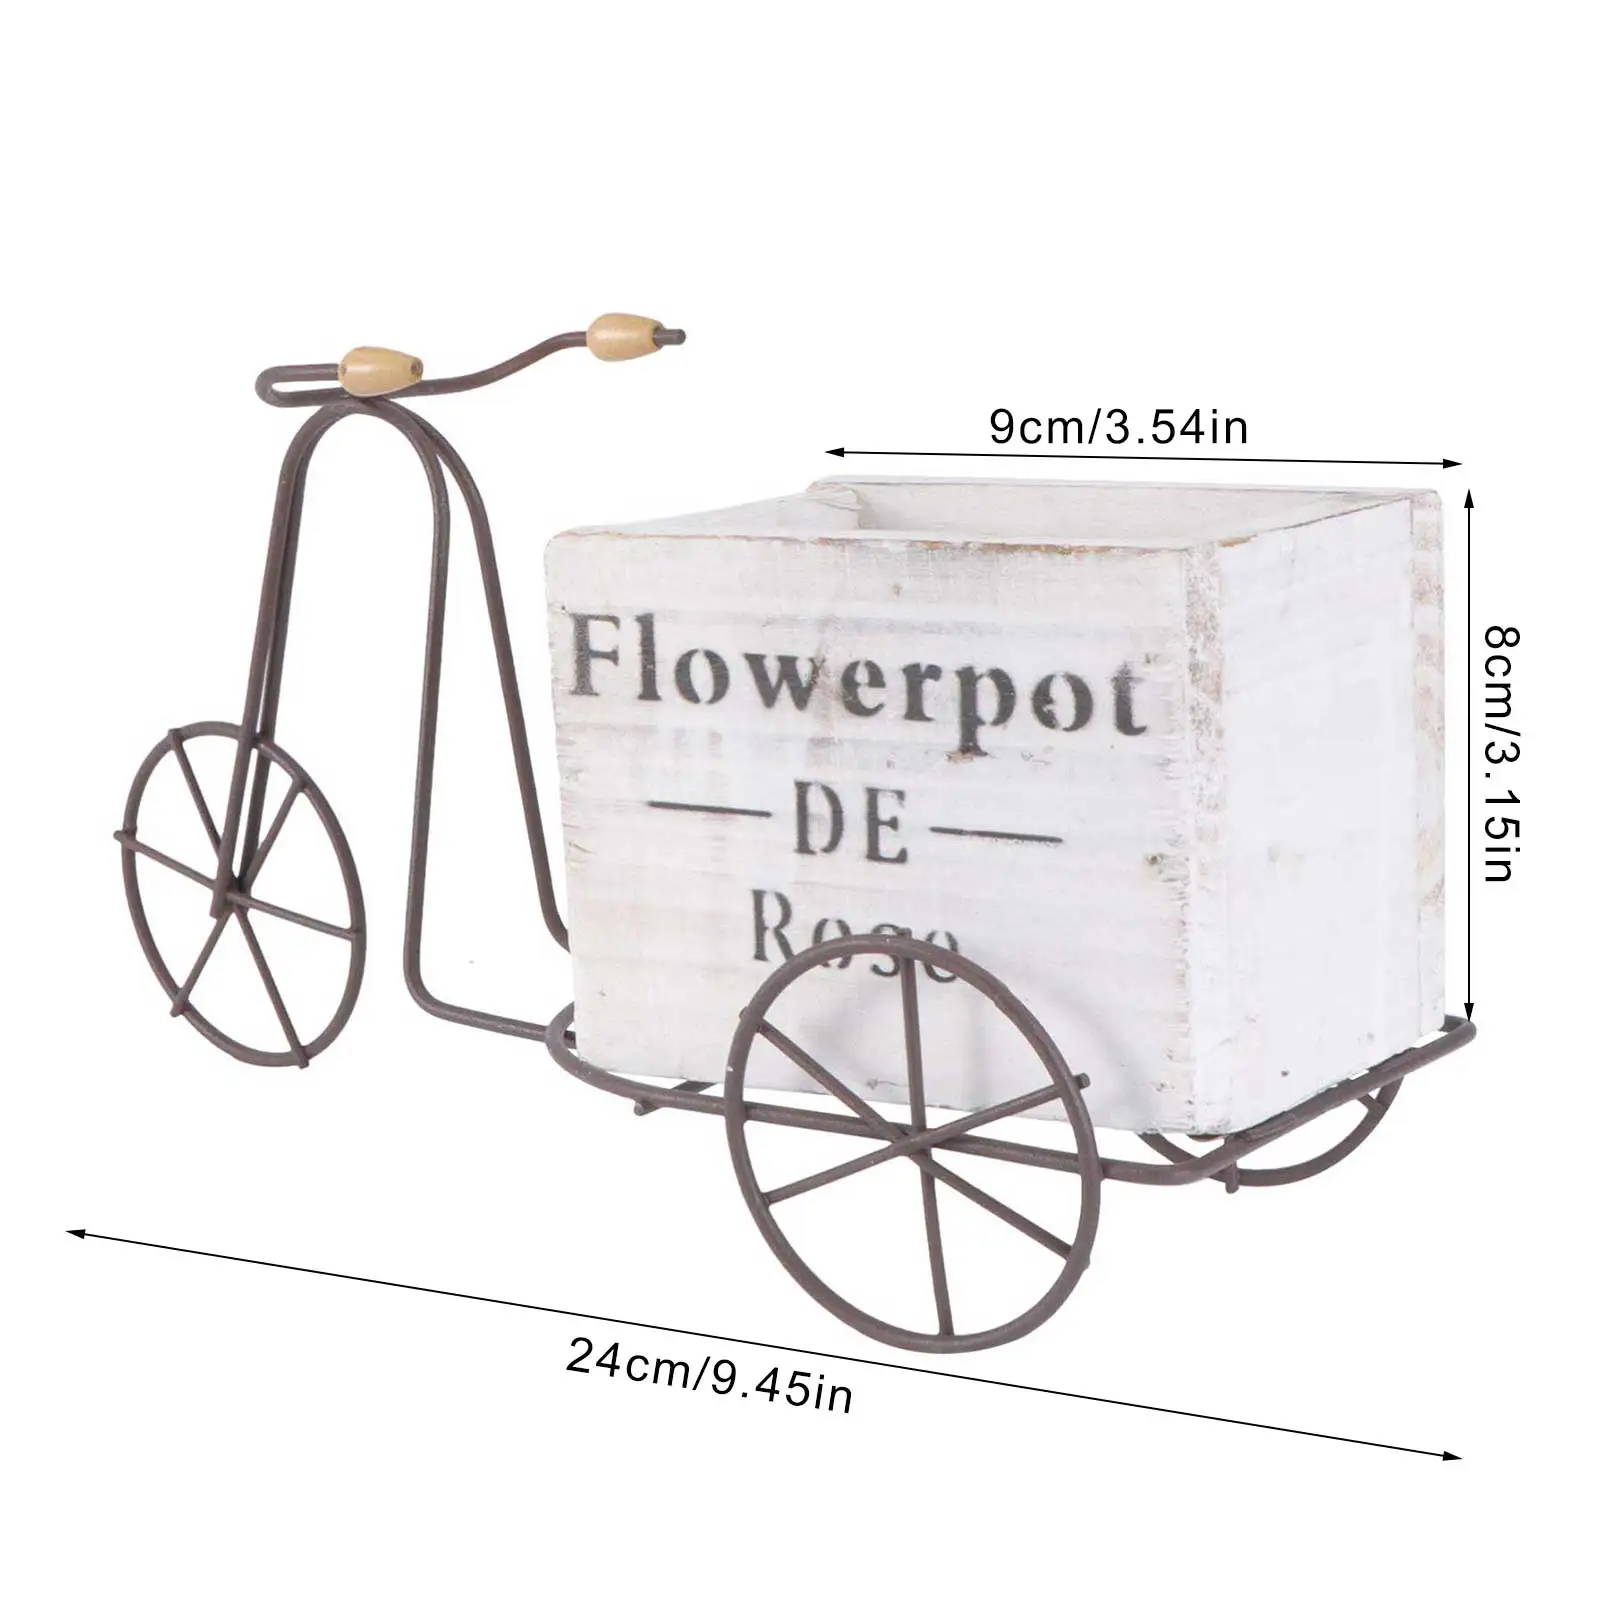 Gardening Bicycle Flower Pot | Antique Wooden Planter Flowerpot | Movable Iron-wheel Flower Containers for Home Yard Garden Deco images - 6